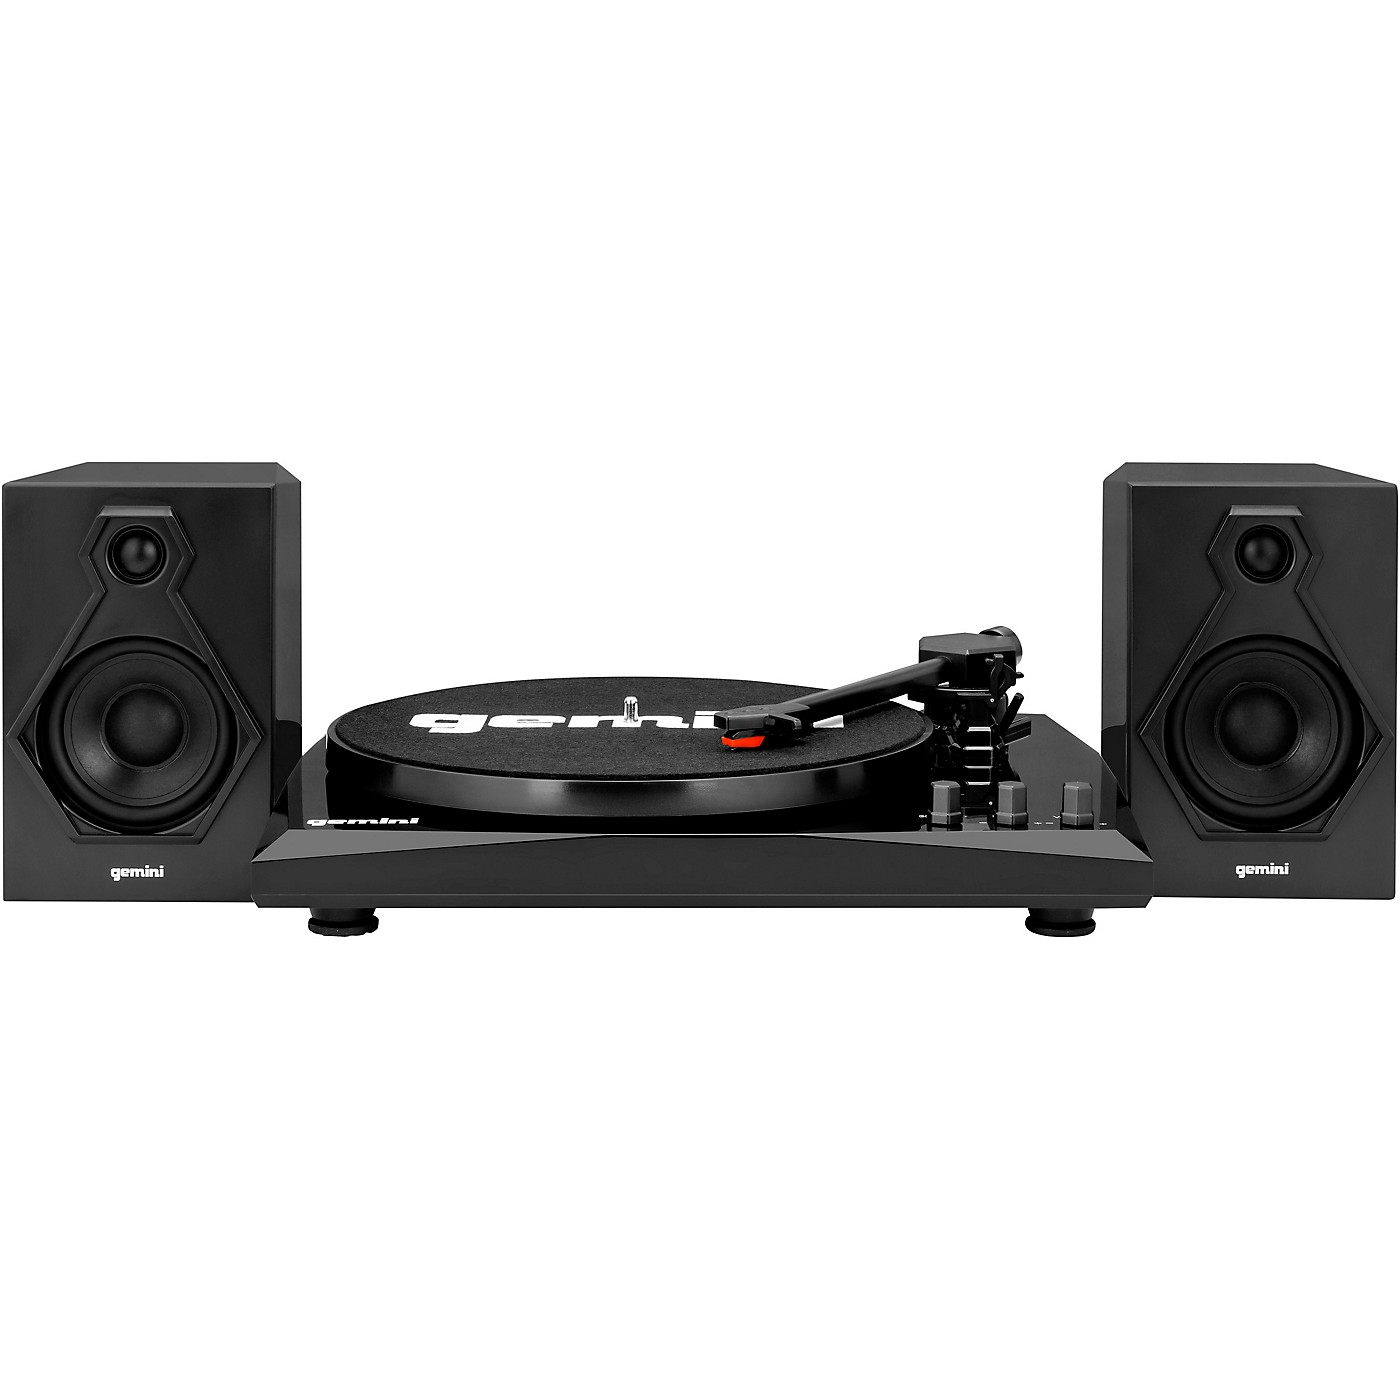 Gemini TT-900BB Vinyl Record Player Turntable With Bluetooth and Dual Stereo Speakers Black/Black thumbnail